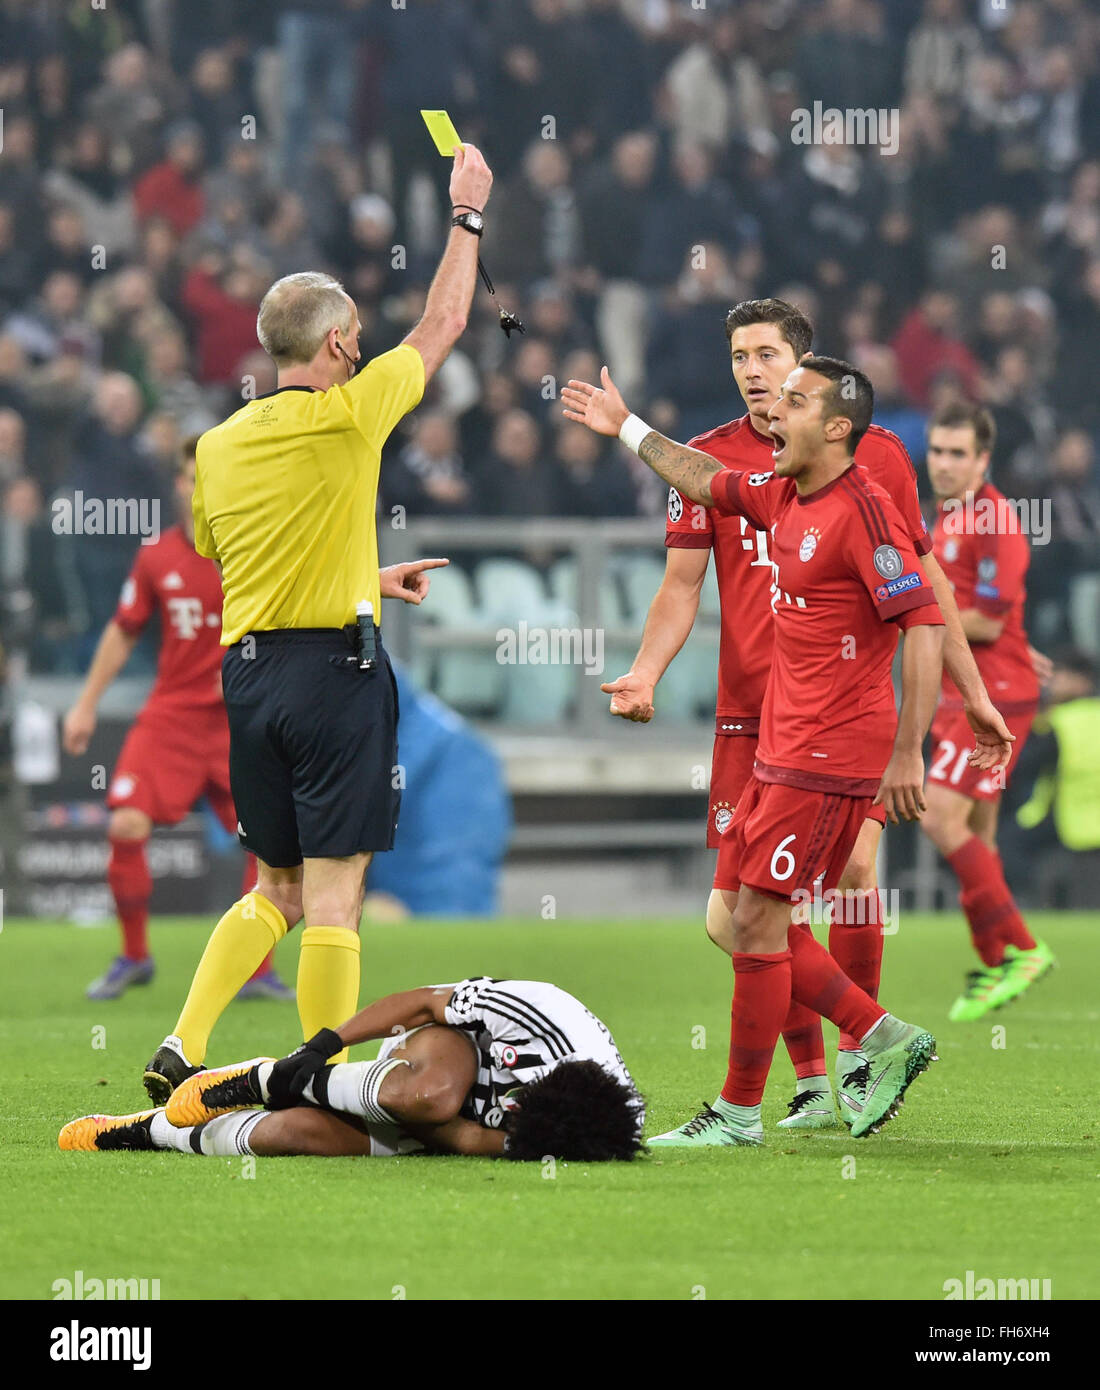 Referee Martin Atkinson from England shows the yellow card to Munich's  Robert Lewandowski (2nd R) while Juve's Juan Cuadrado lies on the ground  during the UEFA Champions League round of 16 first